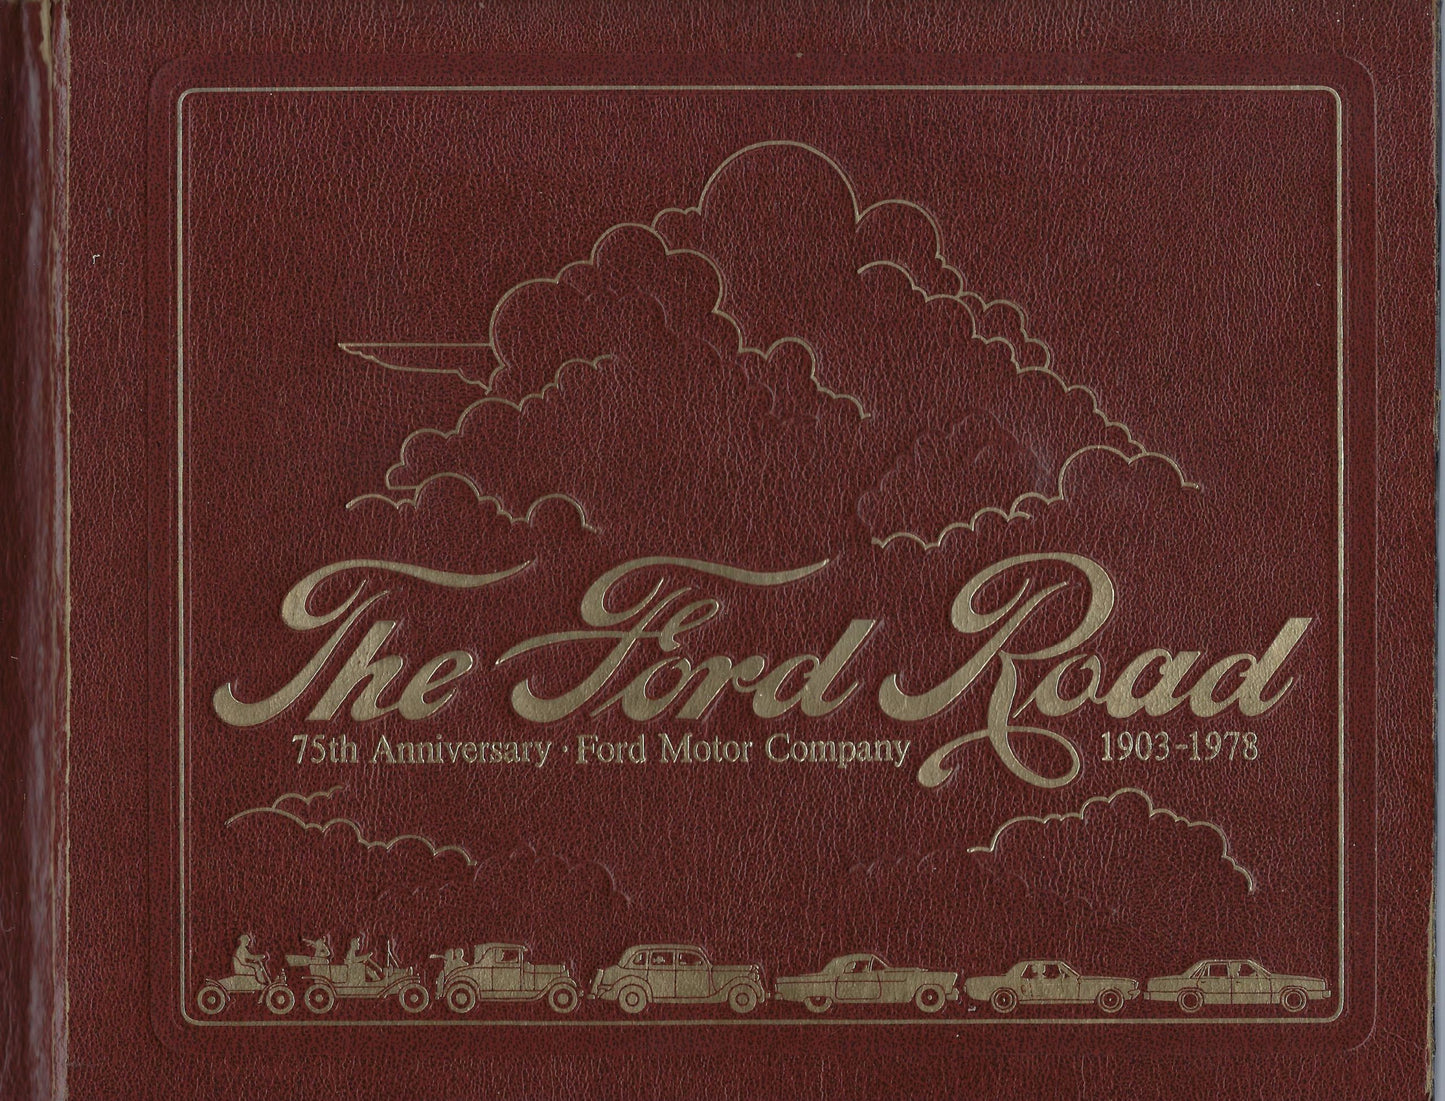 The Ford Road 75th anniversary 1903-1978